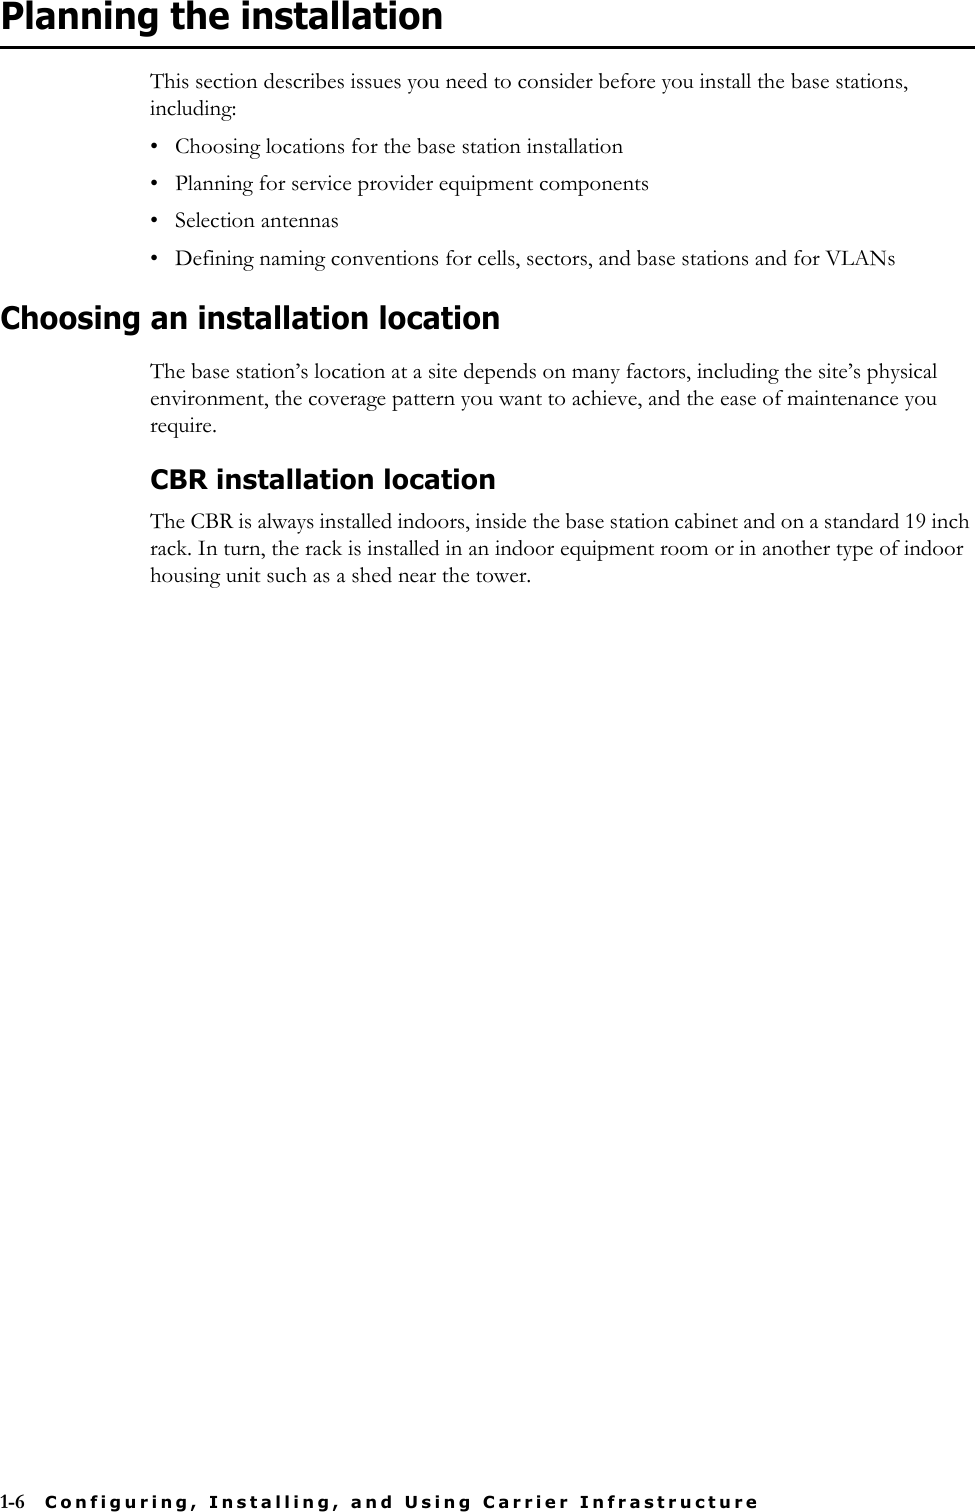 1-6 Configuring, Installing, and Using Carrier InfrastructurePlanning the installationThis section describes issues you need to consider before you install the base stations, including:• Choosing locations for the base station installation• Planning for service provider equipment components• Selection antennas• Defining naming conventions for cells, sectors, and base stations and for VLANsChoosing an installation locationThe base station’s location at a site depends on many factors, including the site’s physical environment, the coverage pattern you want to achieve, and the ease of maintenance you require. CBR installation locationThe CBR is always installed indoors, inside the base station cabinet and on a standard 19 inch rack. In turn, the rack is installed in an indoor equipment room or in another type of indoor housing unit such as a shed near the tower.